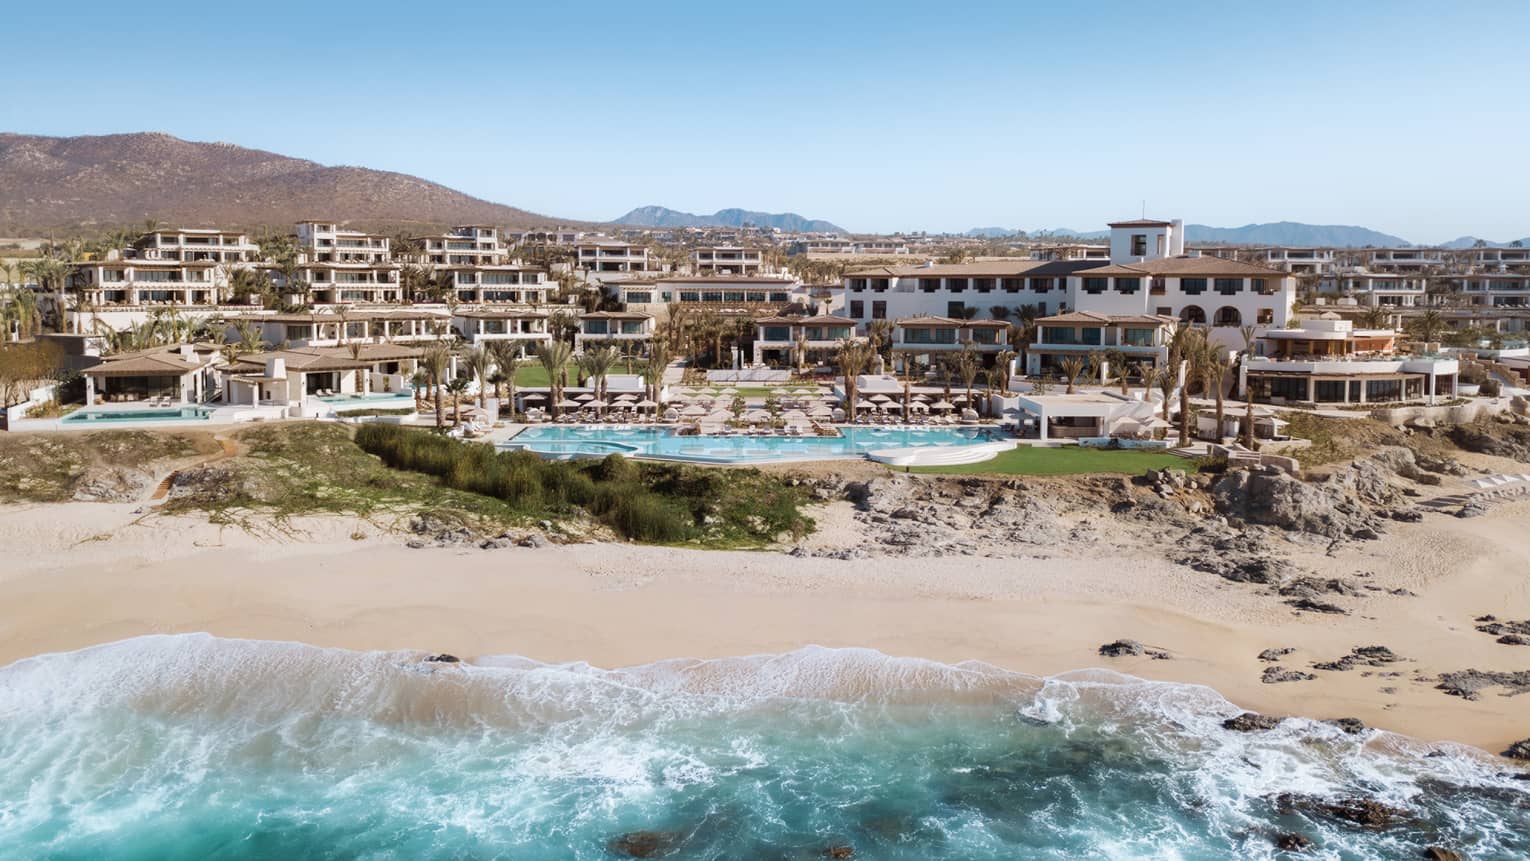 Aerial view of Four Seasons Resort and Residences Cabo San Lucas with beach